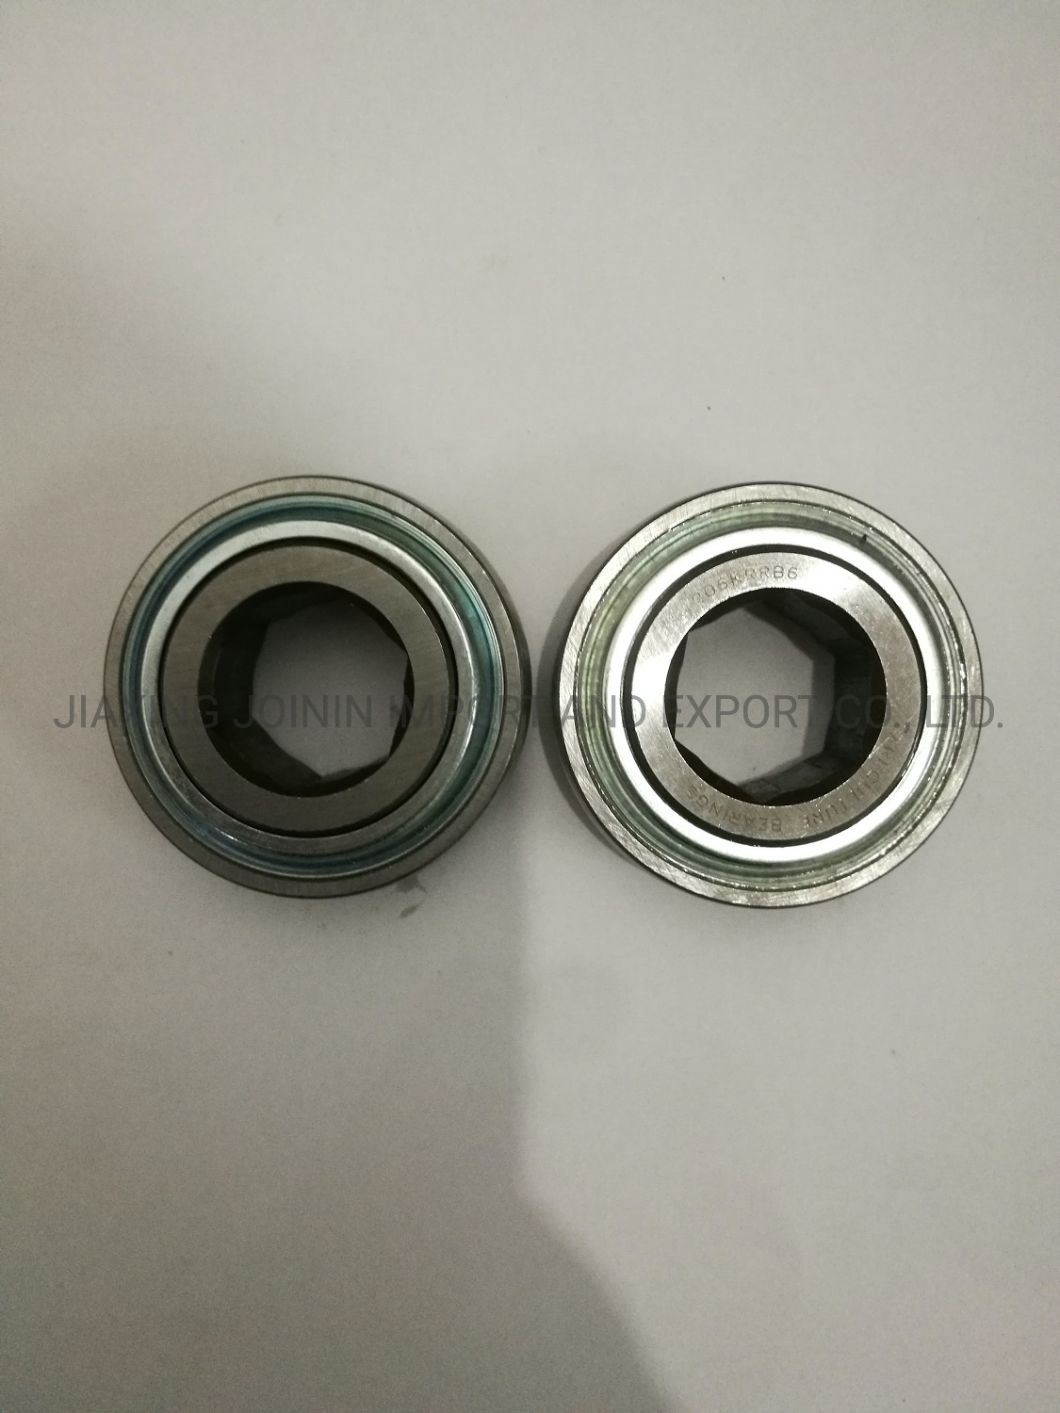 202krr3 Agricultural Machinery Bearing Heavy Duty Bearing Hex Socket Bore Bearing Non-Relubricable Farm Machinery Bearing